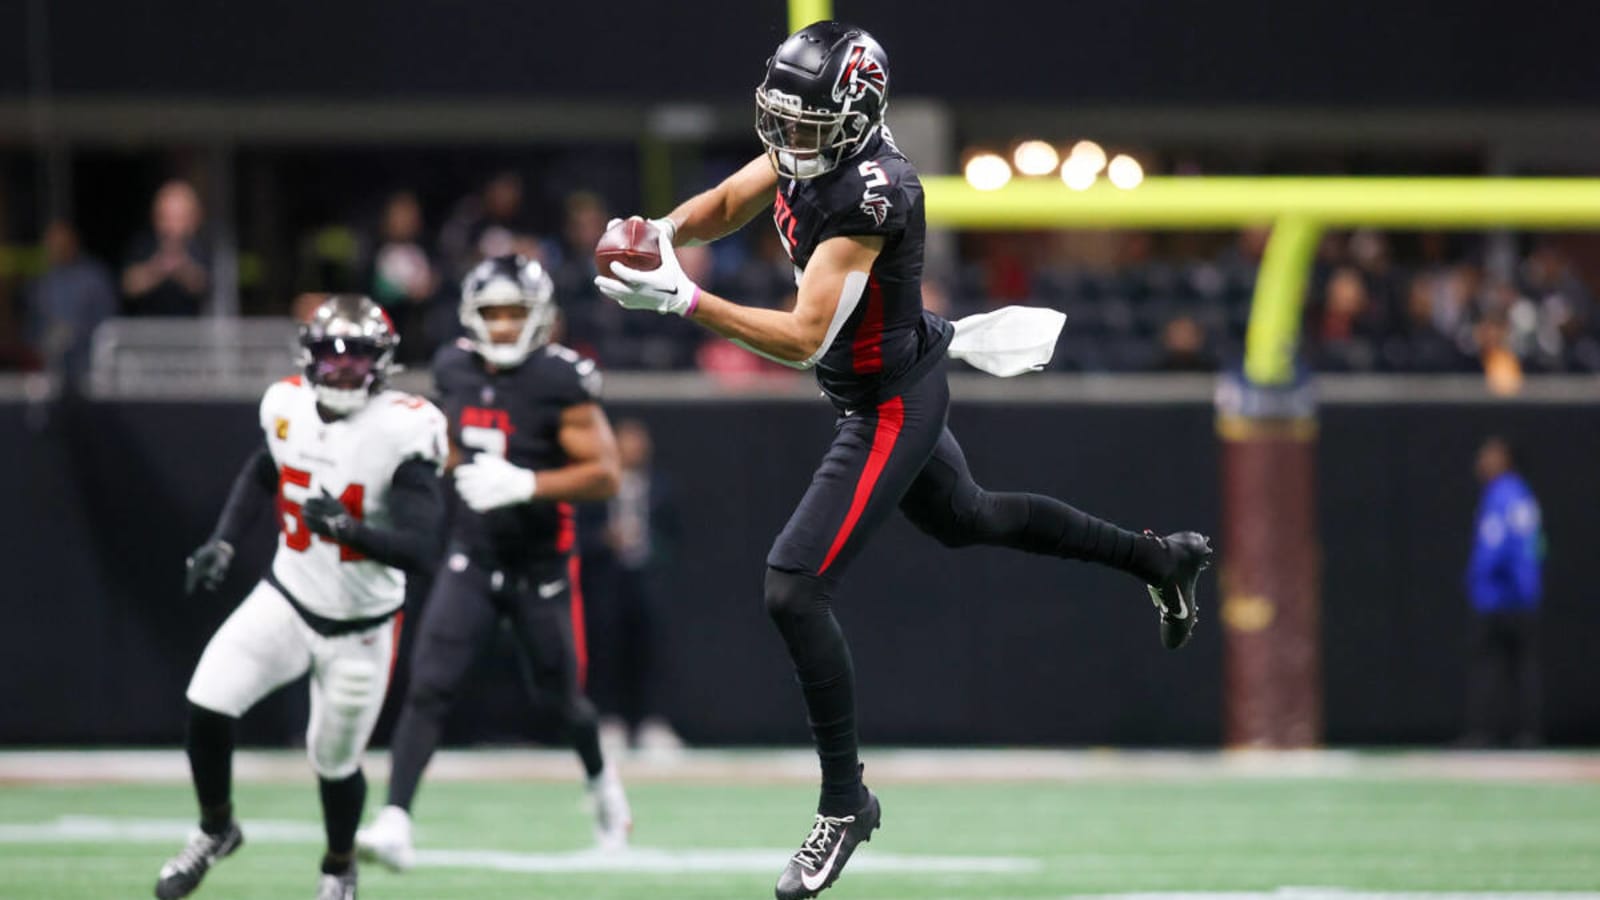 New Falcons GOAT WR? Drake London Takes Record From Julio Jones